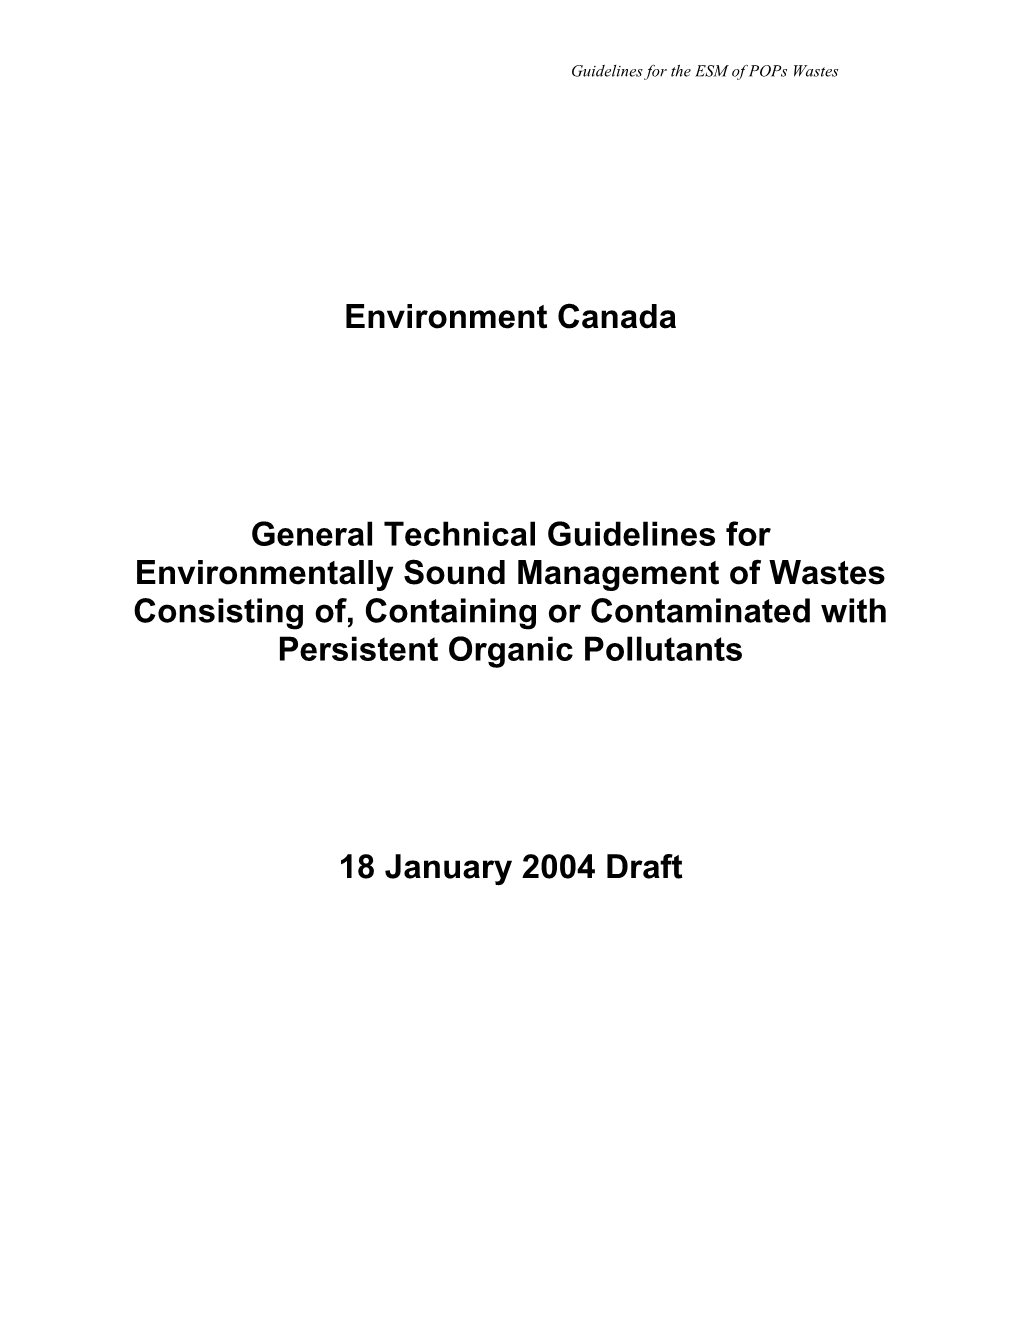 DRAFT General Technical Guidelines for Environmentally Sound Management (ESM) of Wastes